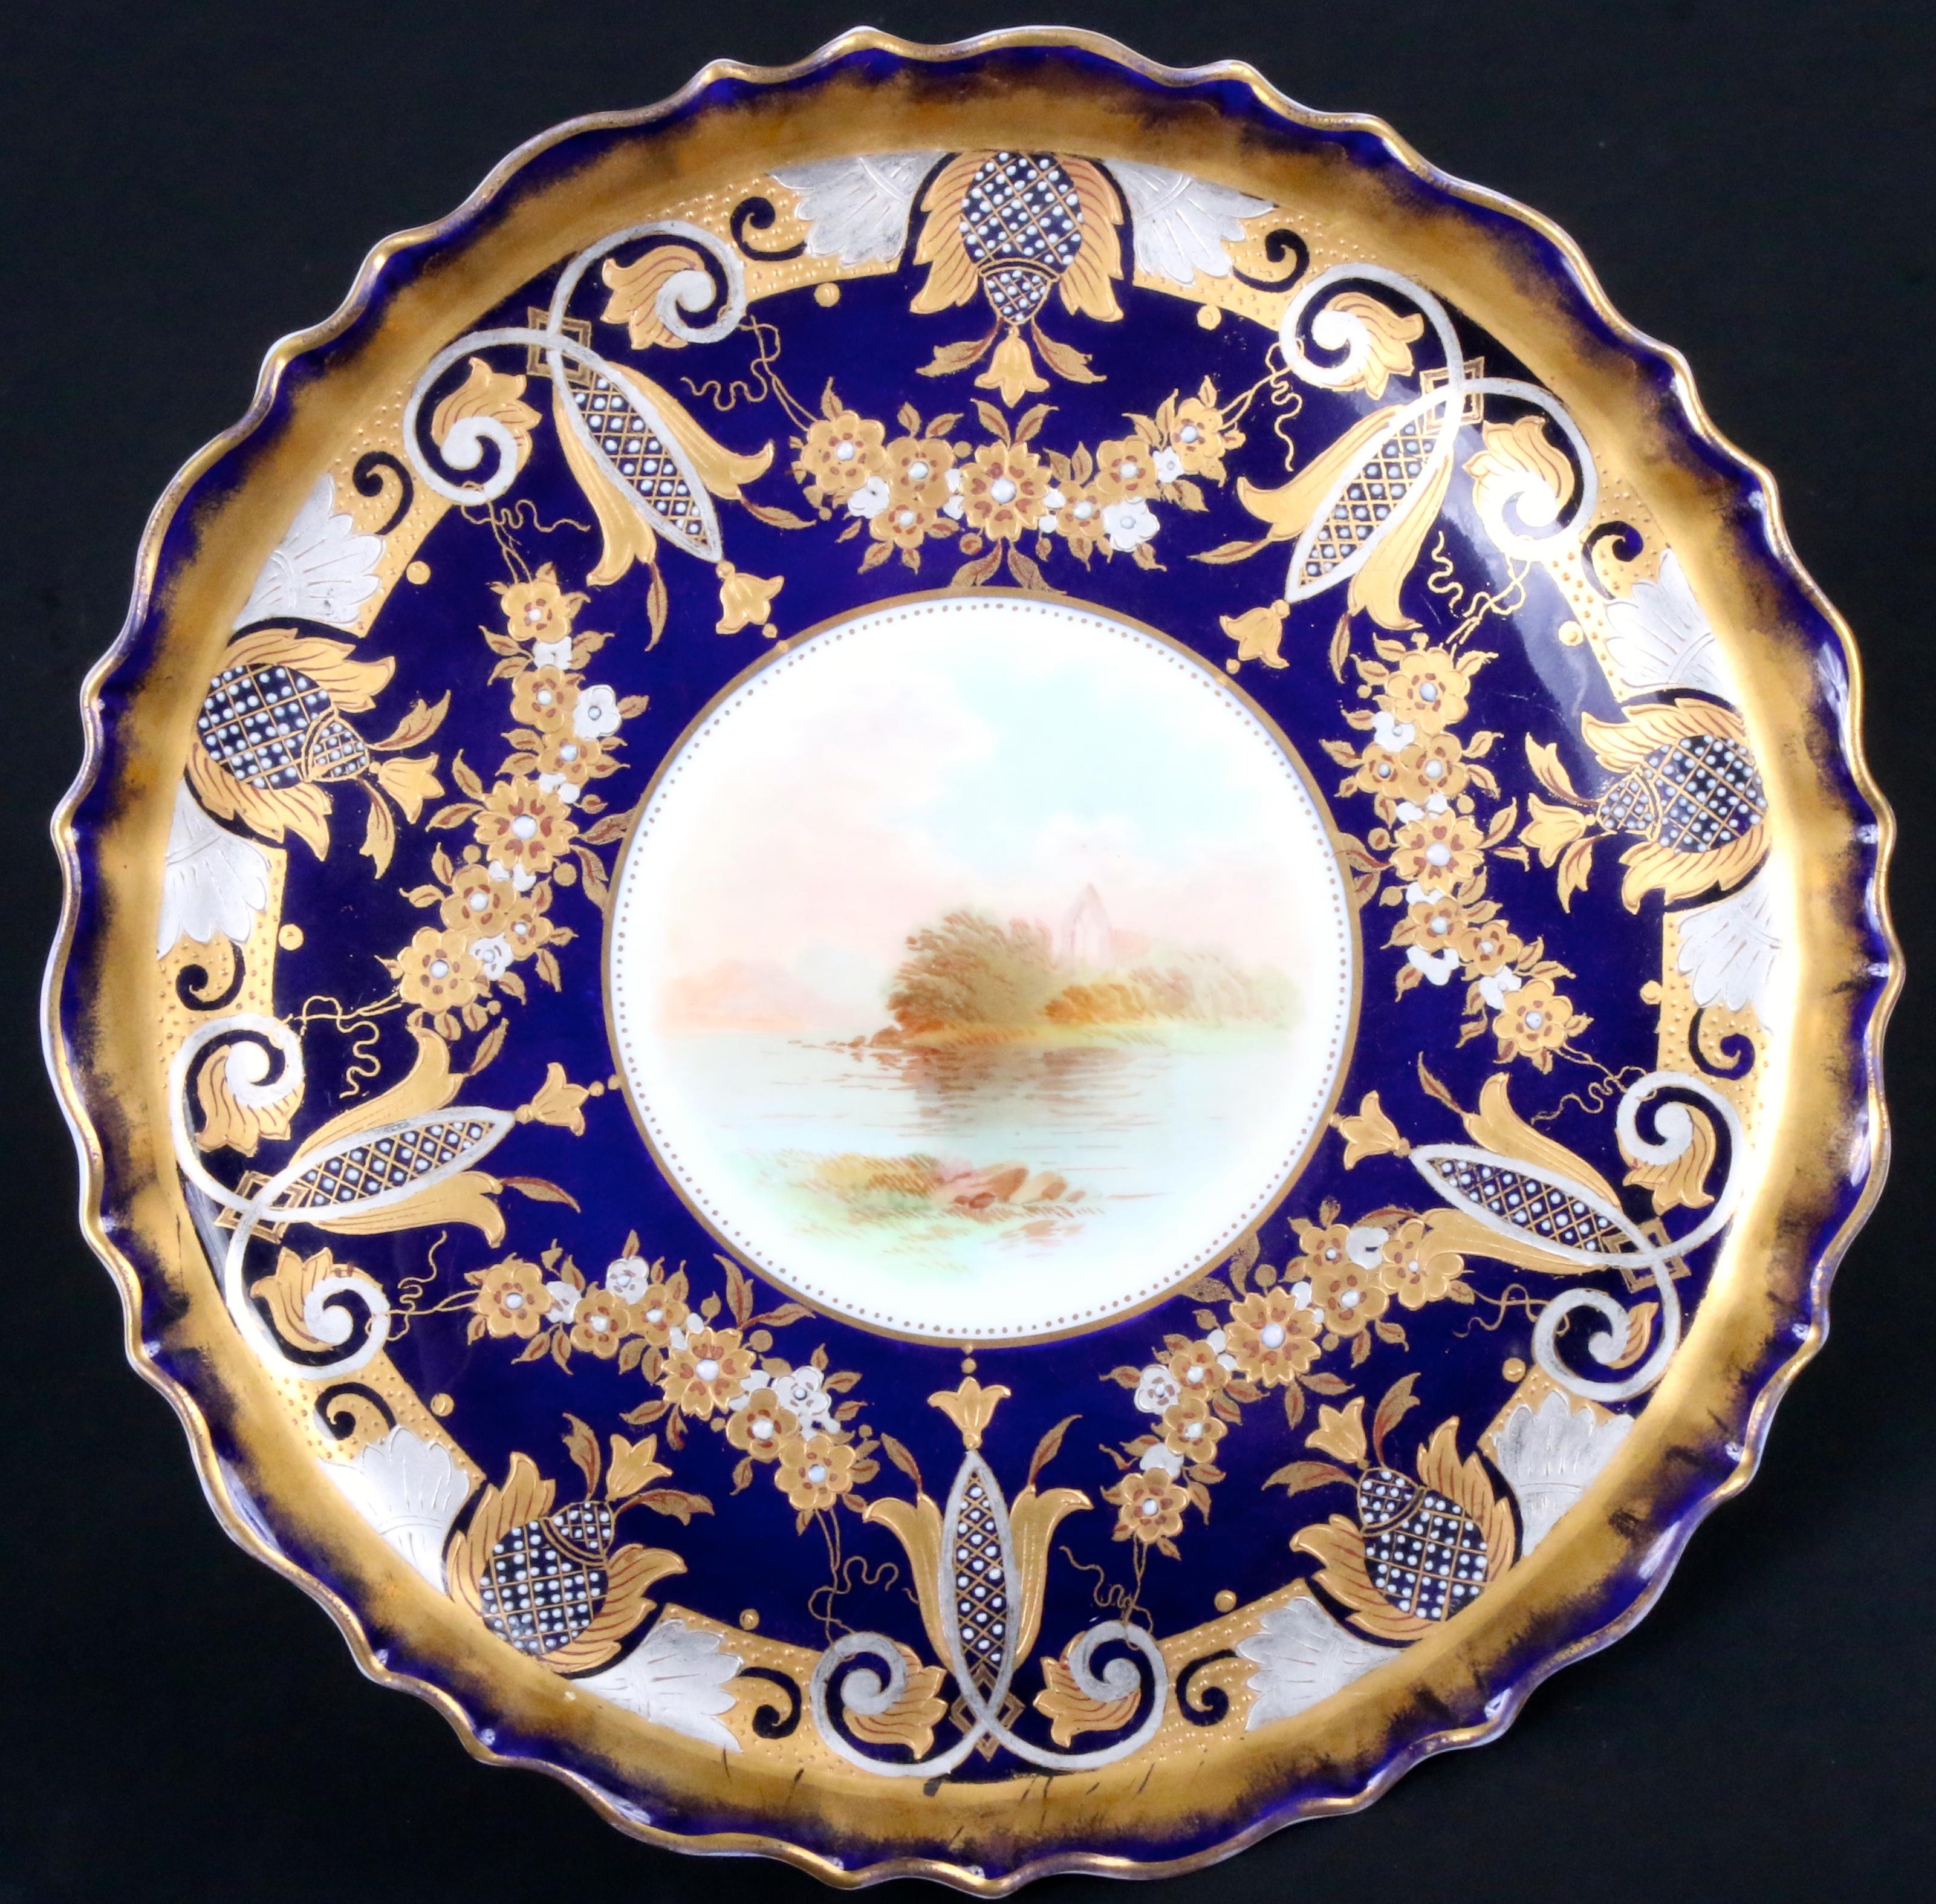 19th Century hand-painted dessert service by Bishop & Stonier, Hanley, Stafforshire, England. The set is composed of a tazza or compote and 10 dessert plates. The set has a cobalt blue background and is elaborately gilded in both yellow and white